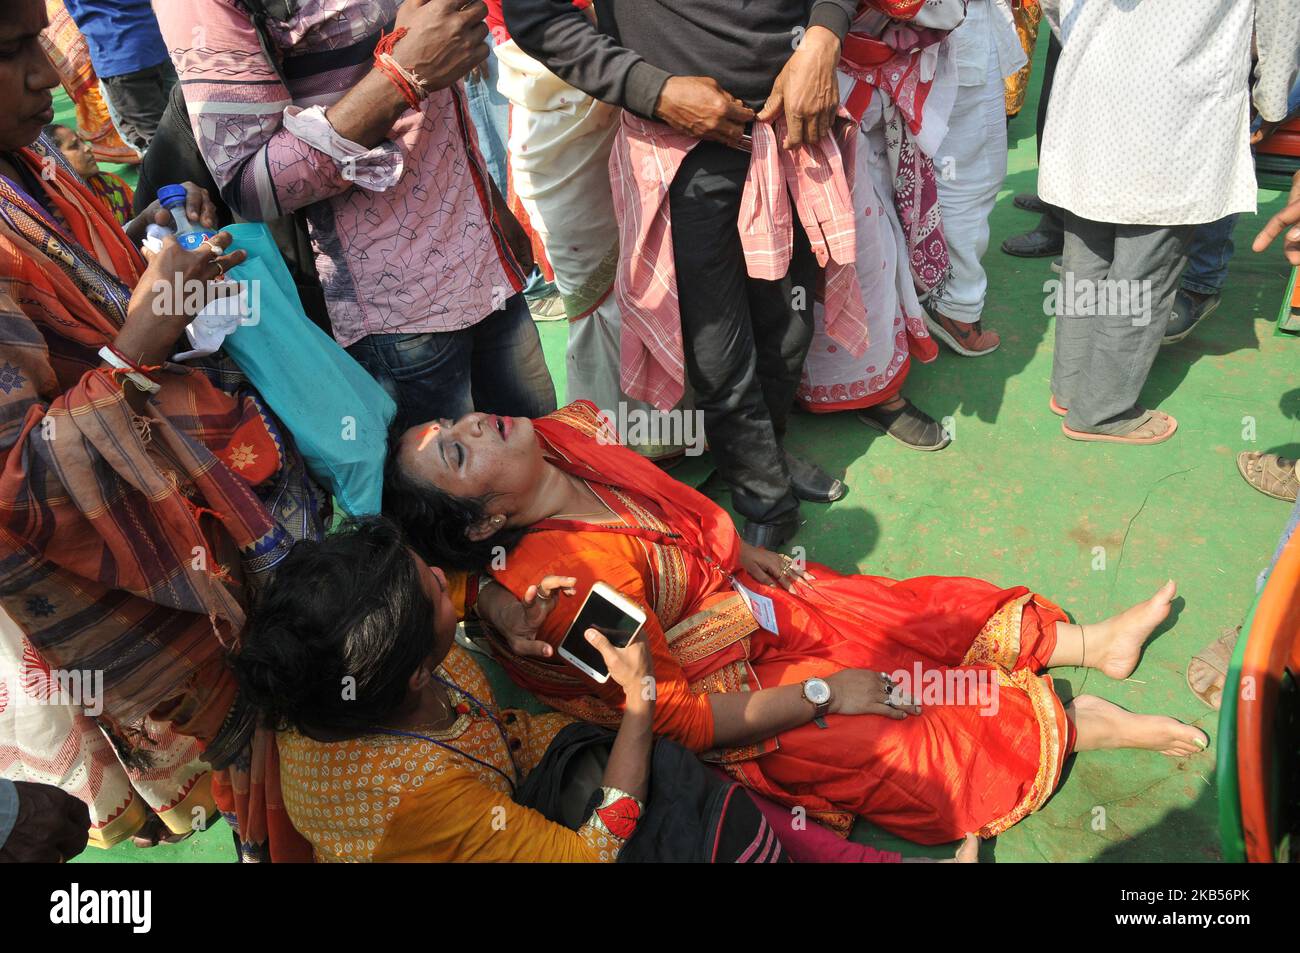 An injured person after a stampede-like situation at a public meeting addressed by Prime Minister Narendra Modi at Thakurnagar in West Bengal on February 2, 2019. Prime Minister Narendra Modi cut short his speech at a rally in North 24 Parganas district on Saturday after a stampede-like situation broke out at the venue in which many people were injured. (Photo by Debajyoti Chakraborty/NurPhoto) Stock Photo